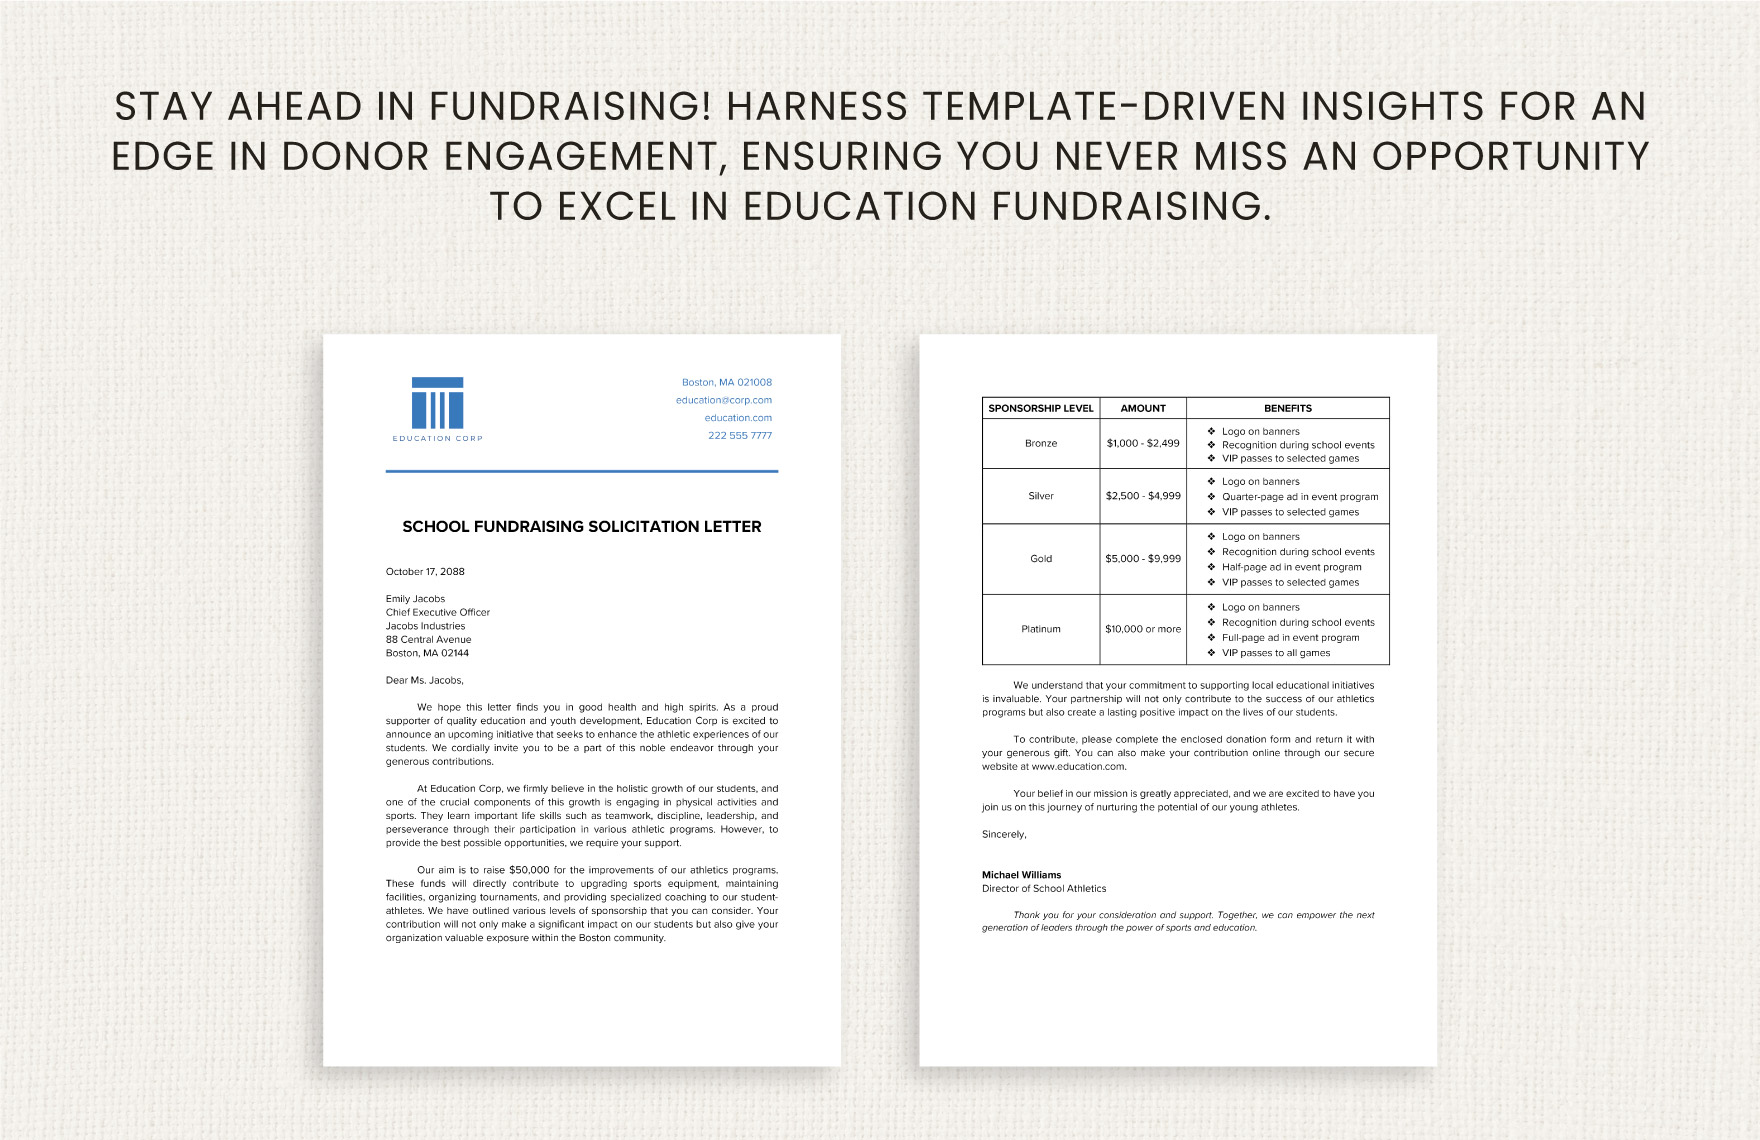 School Fundraising Solicitation Letter Template